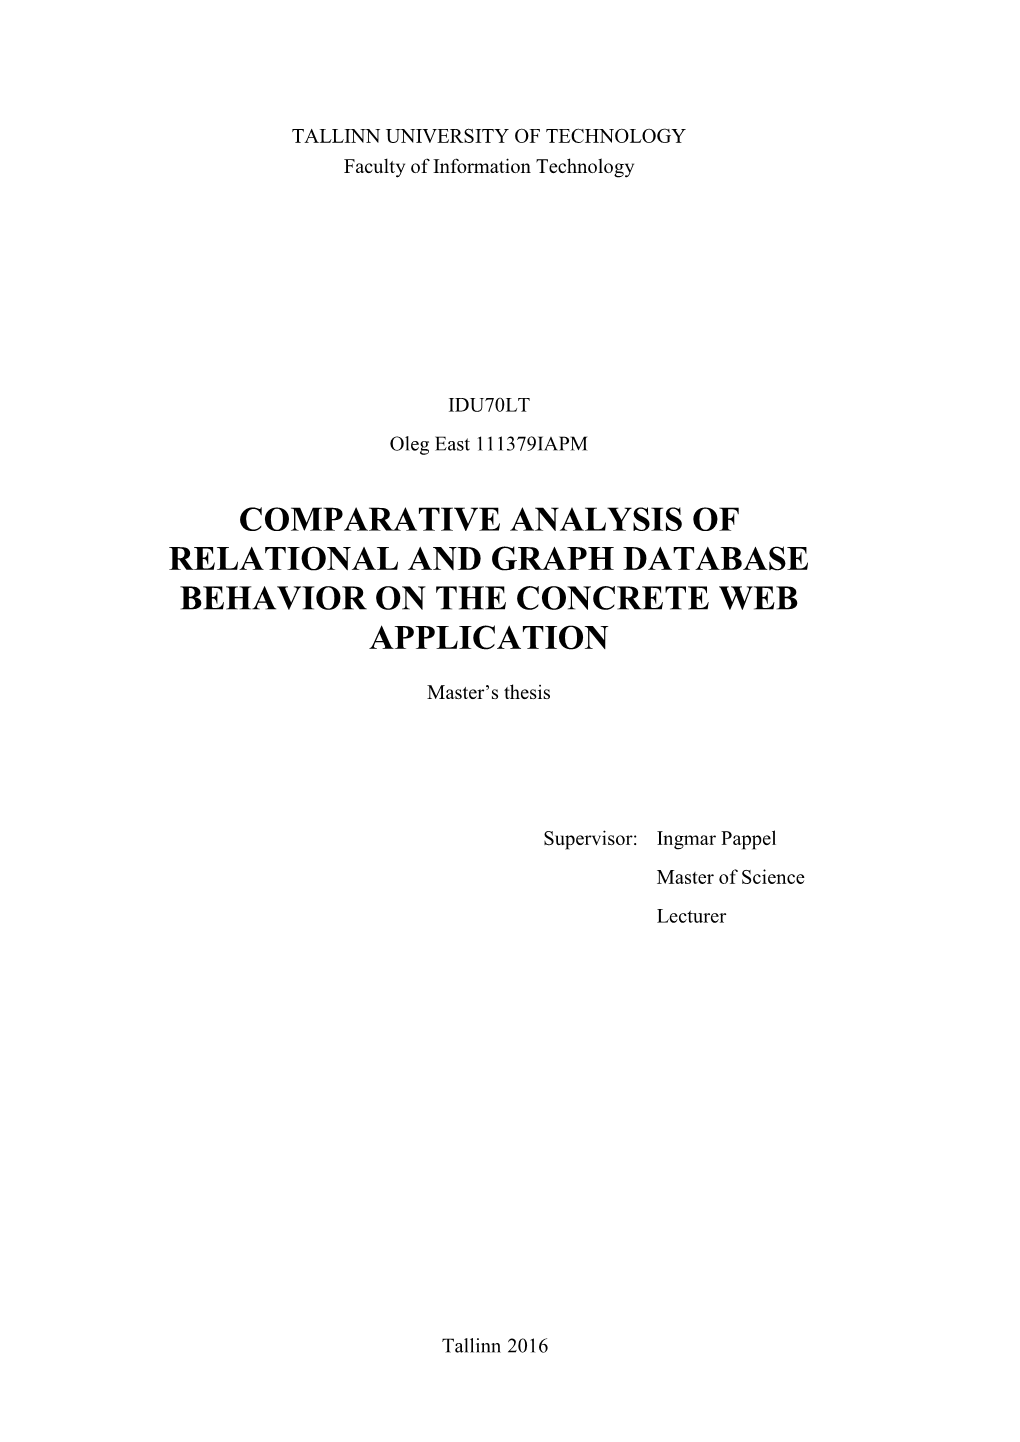 Comparative Analysis of Relational and Graph Database Behavior on the Concrete Web Application